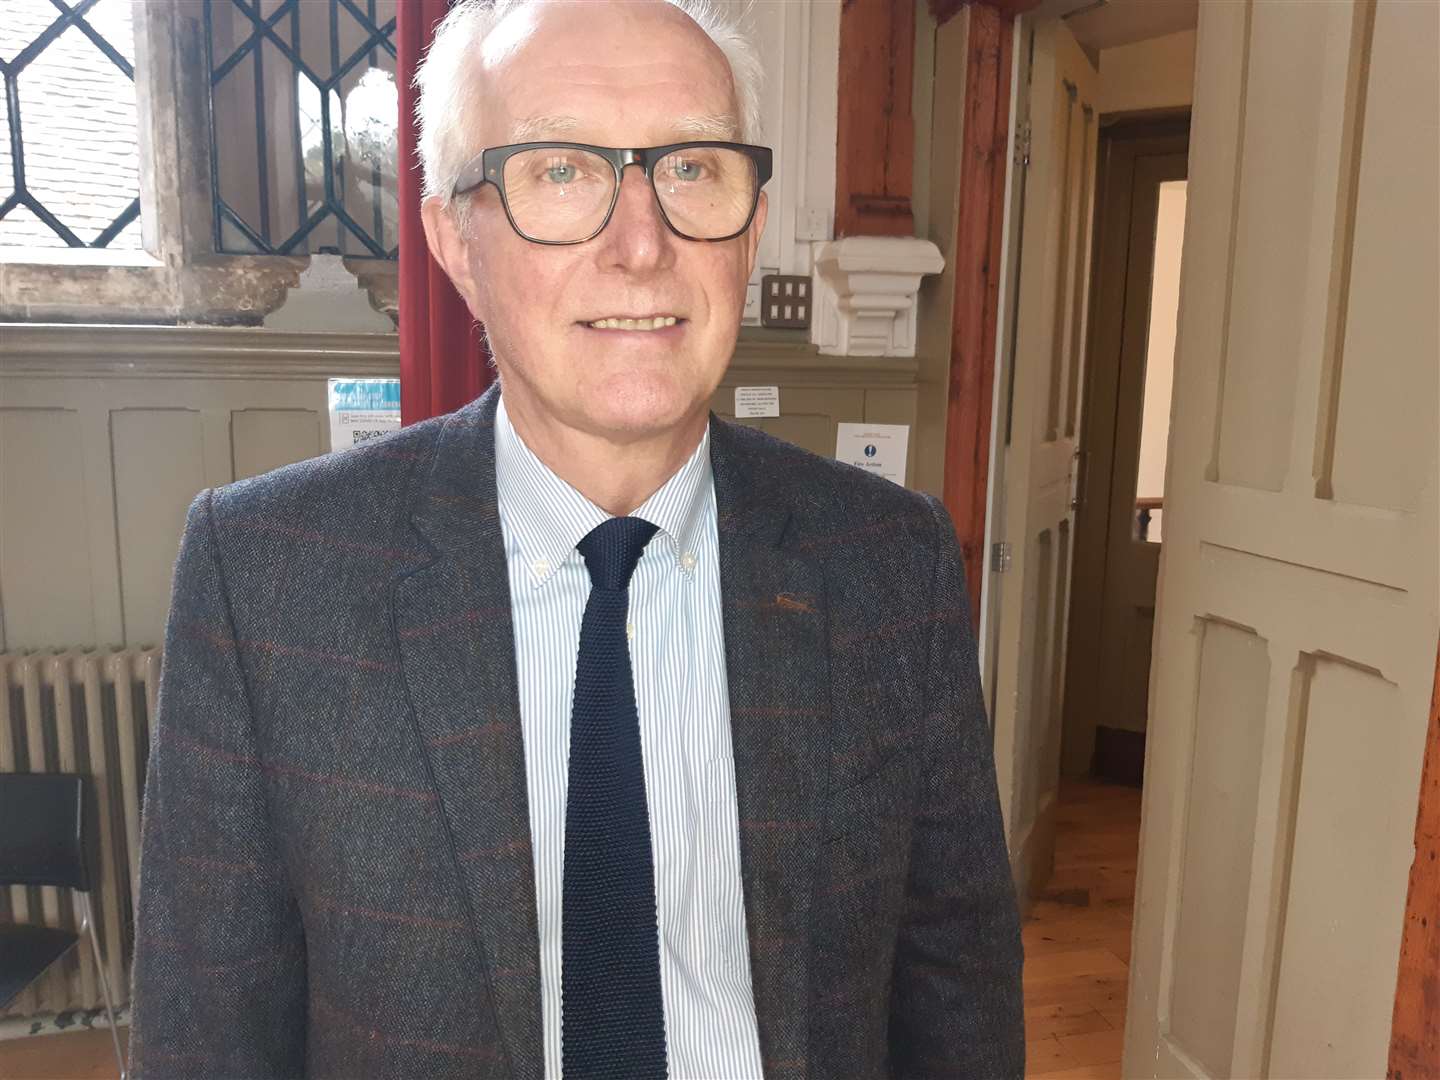 Gordon Young, chairman of governors at Cranbrook School